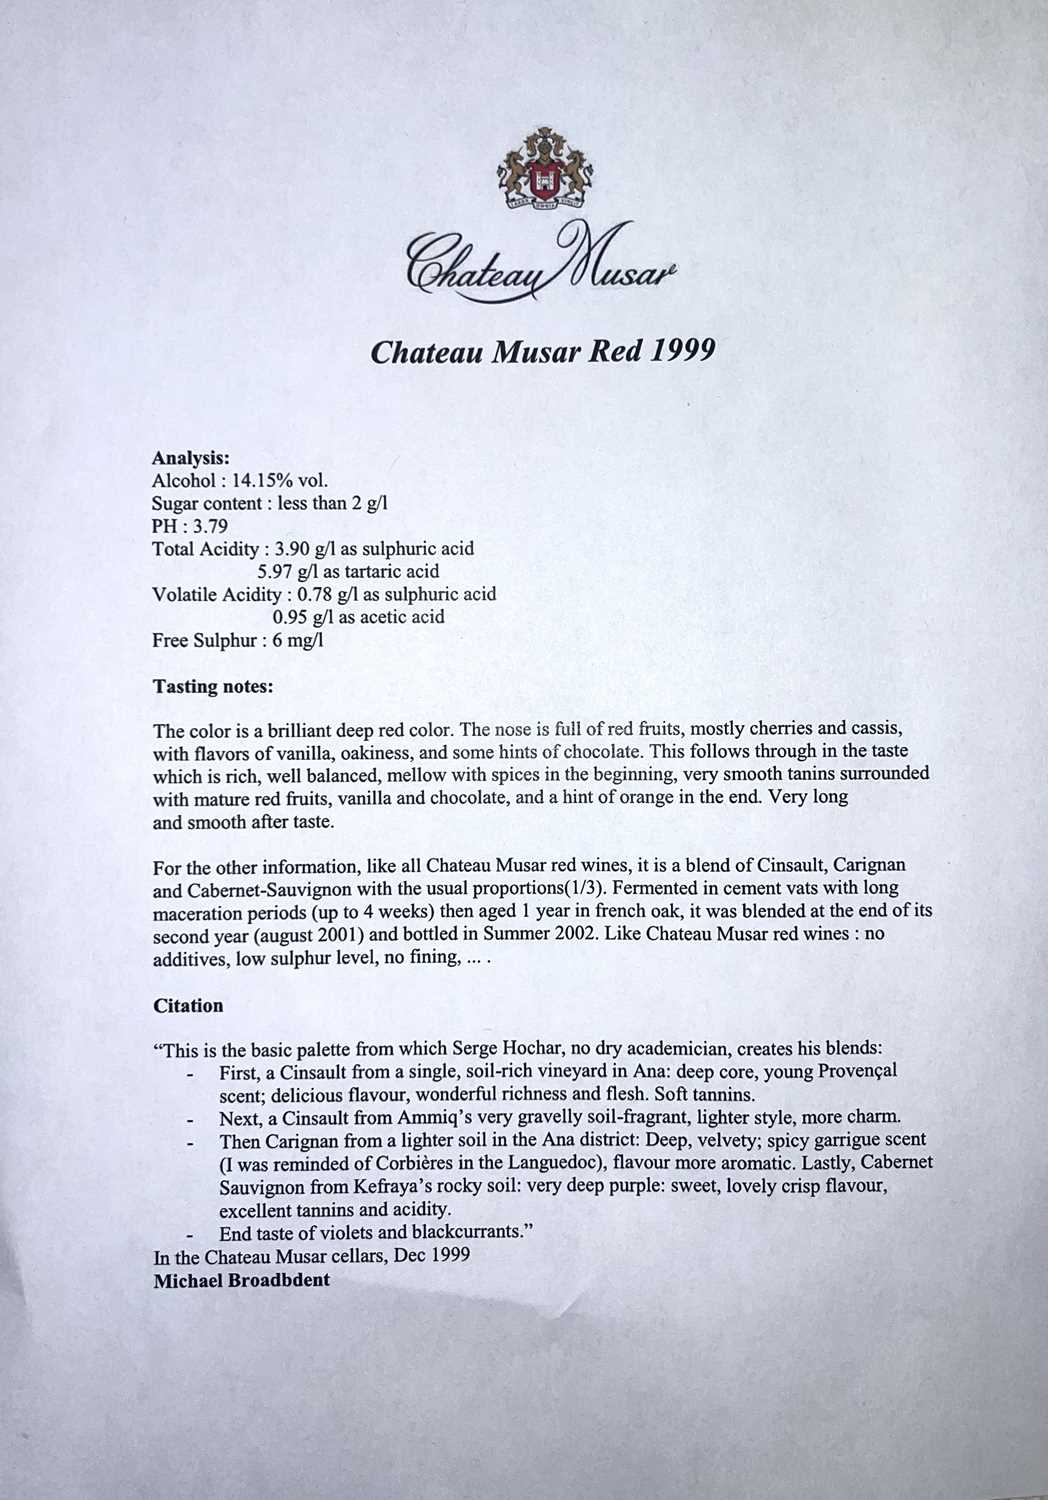 Chateau Musar 1999 - Image 2 of 2